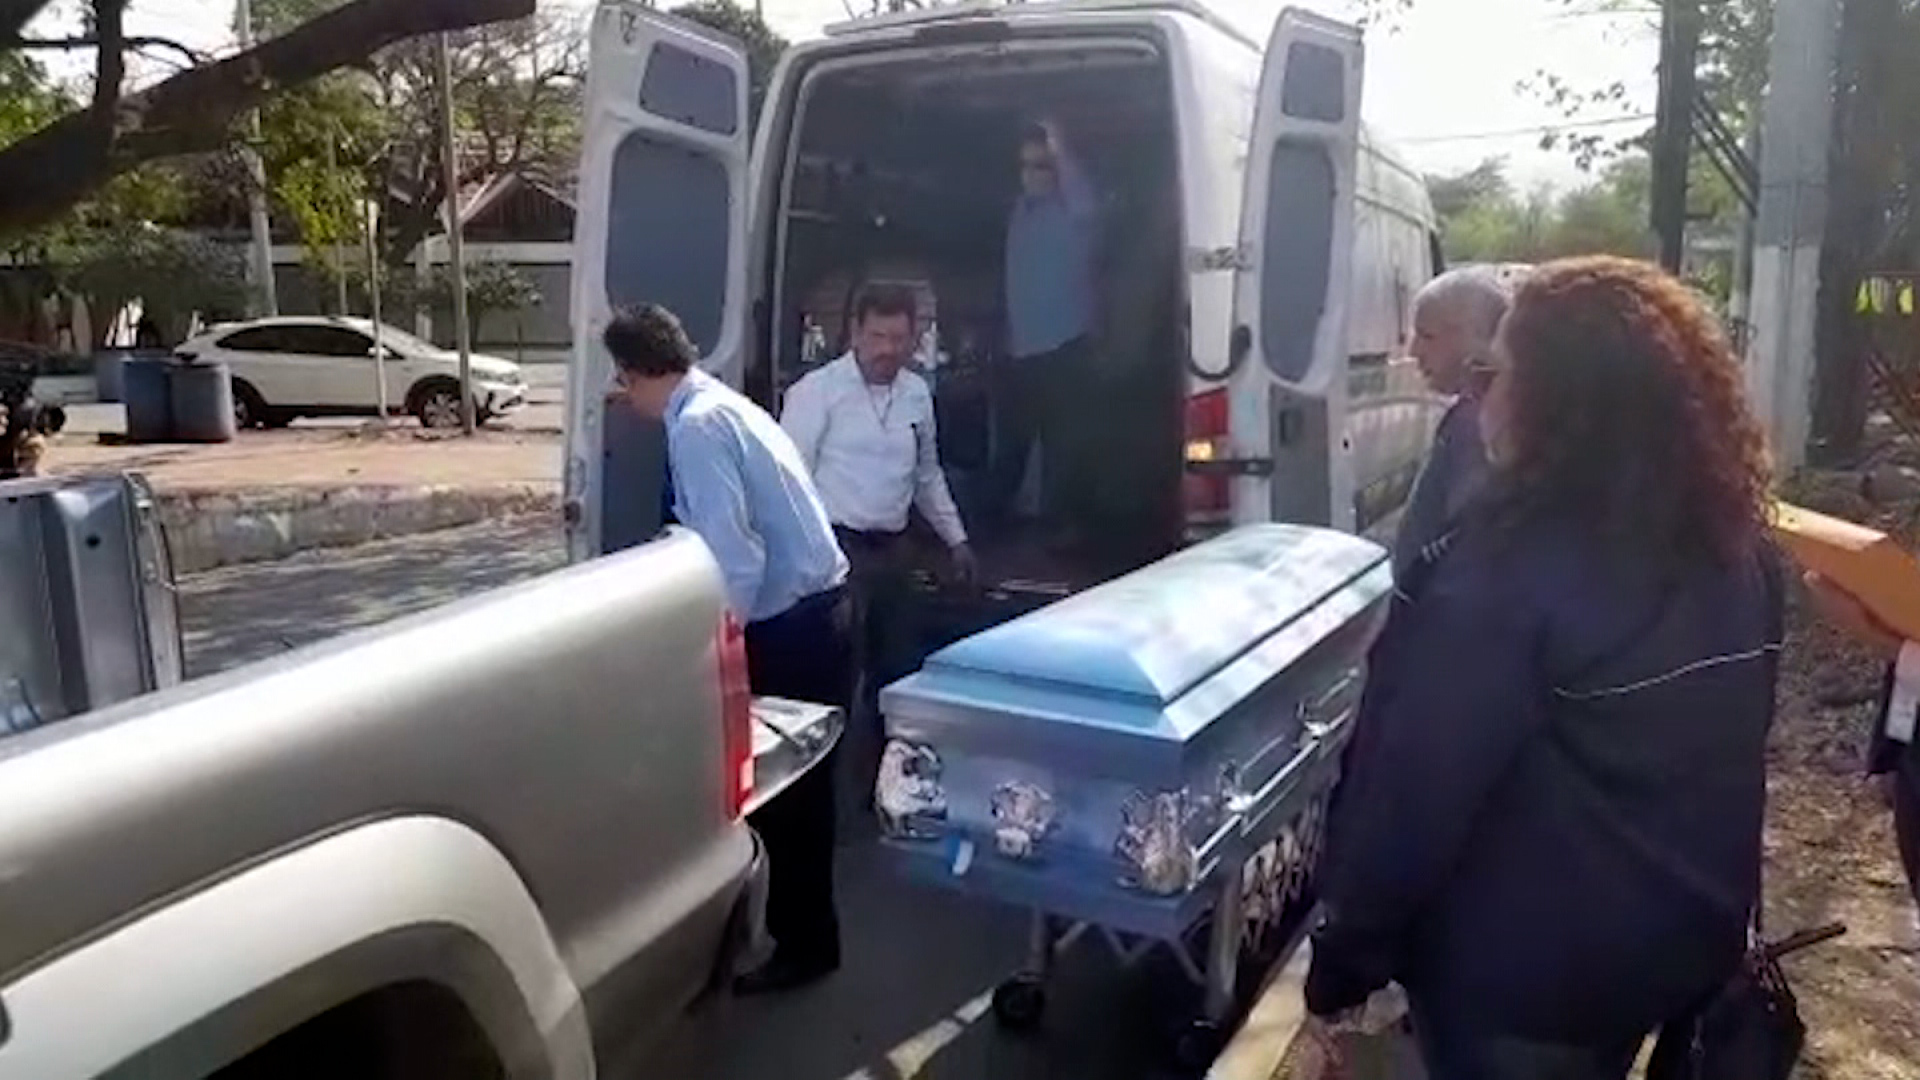 Bodies of 7 migrants killed in a fire in Mexico arrive in El Salvador